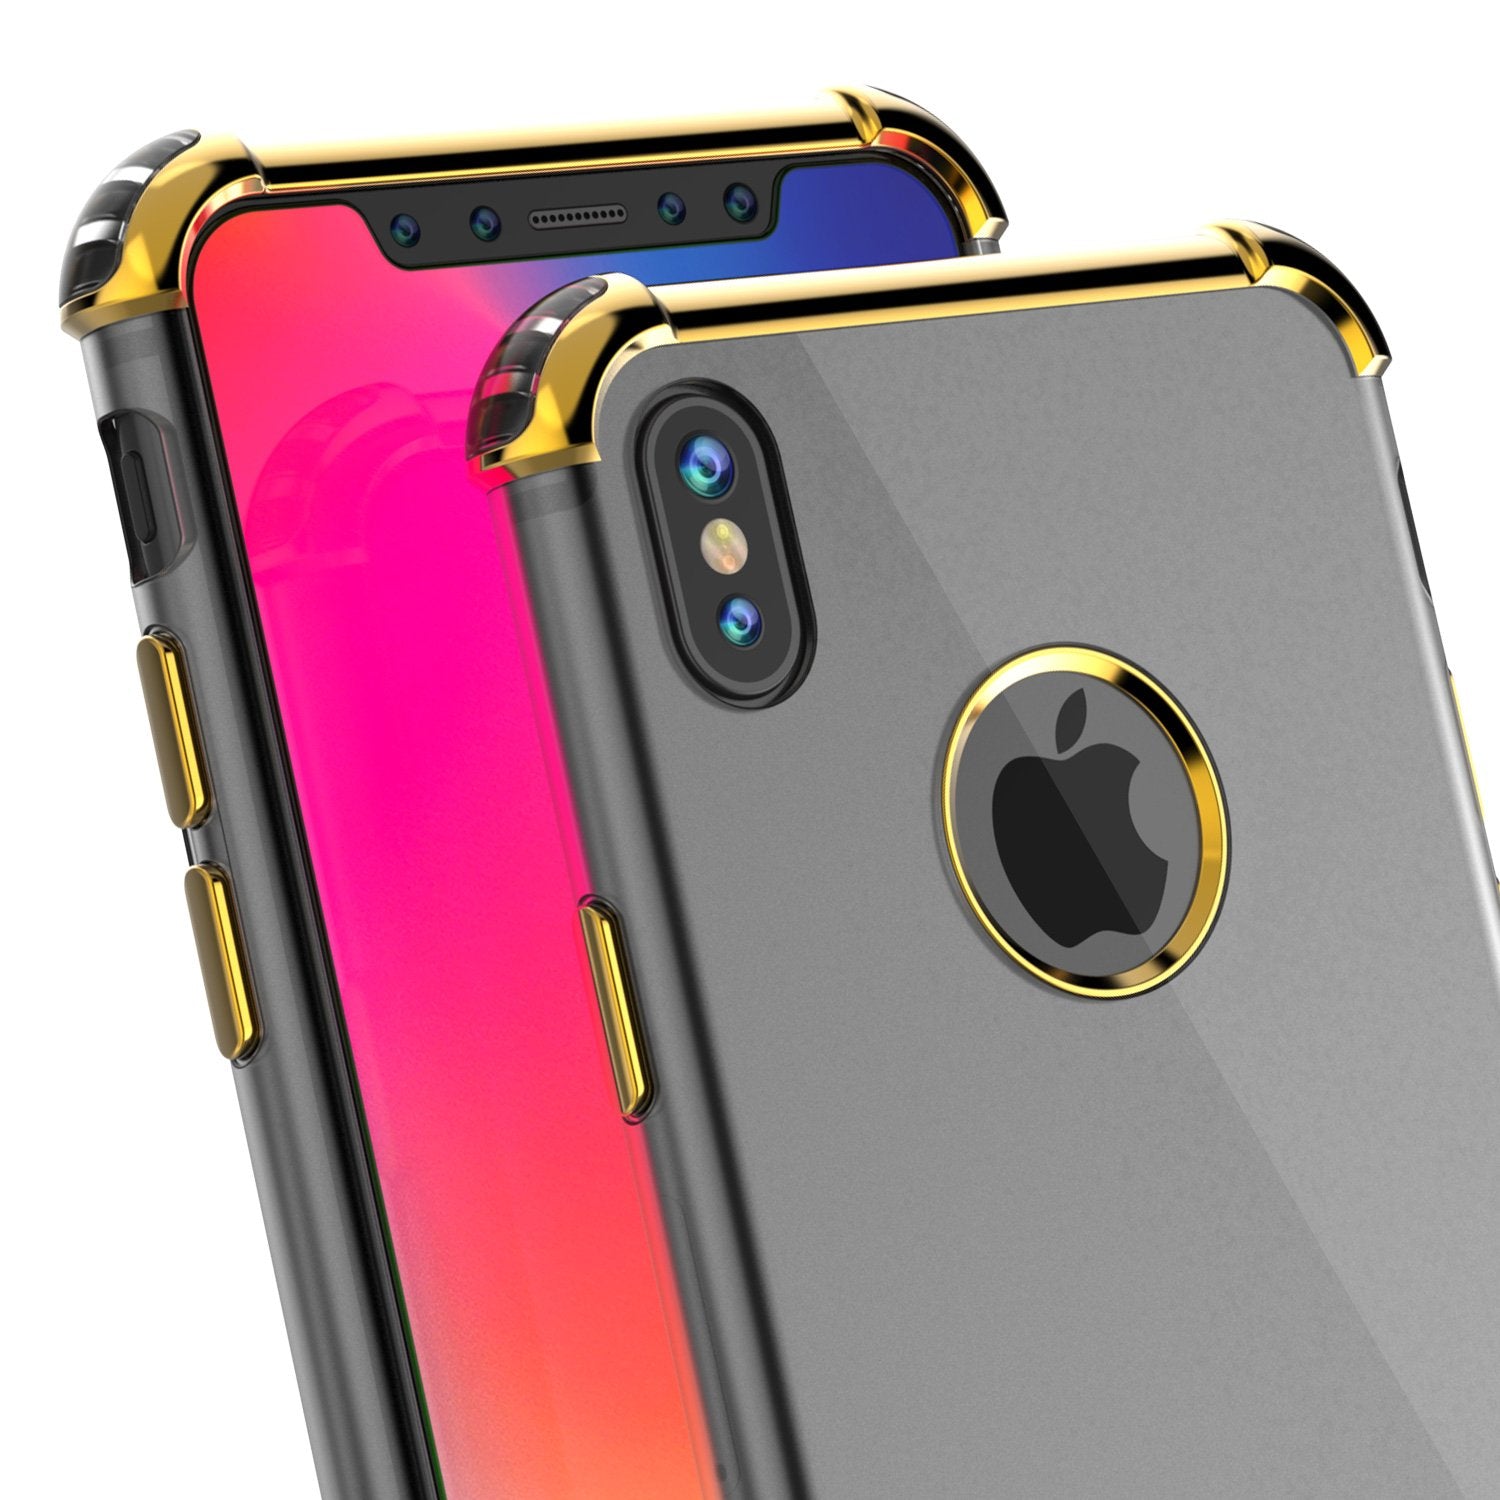 iPhone X Case, Punkcase BLAZE Gold Series Protective Cover W/ PunkShield Screen Protector